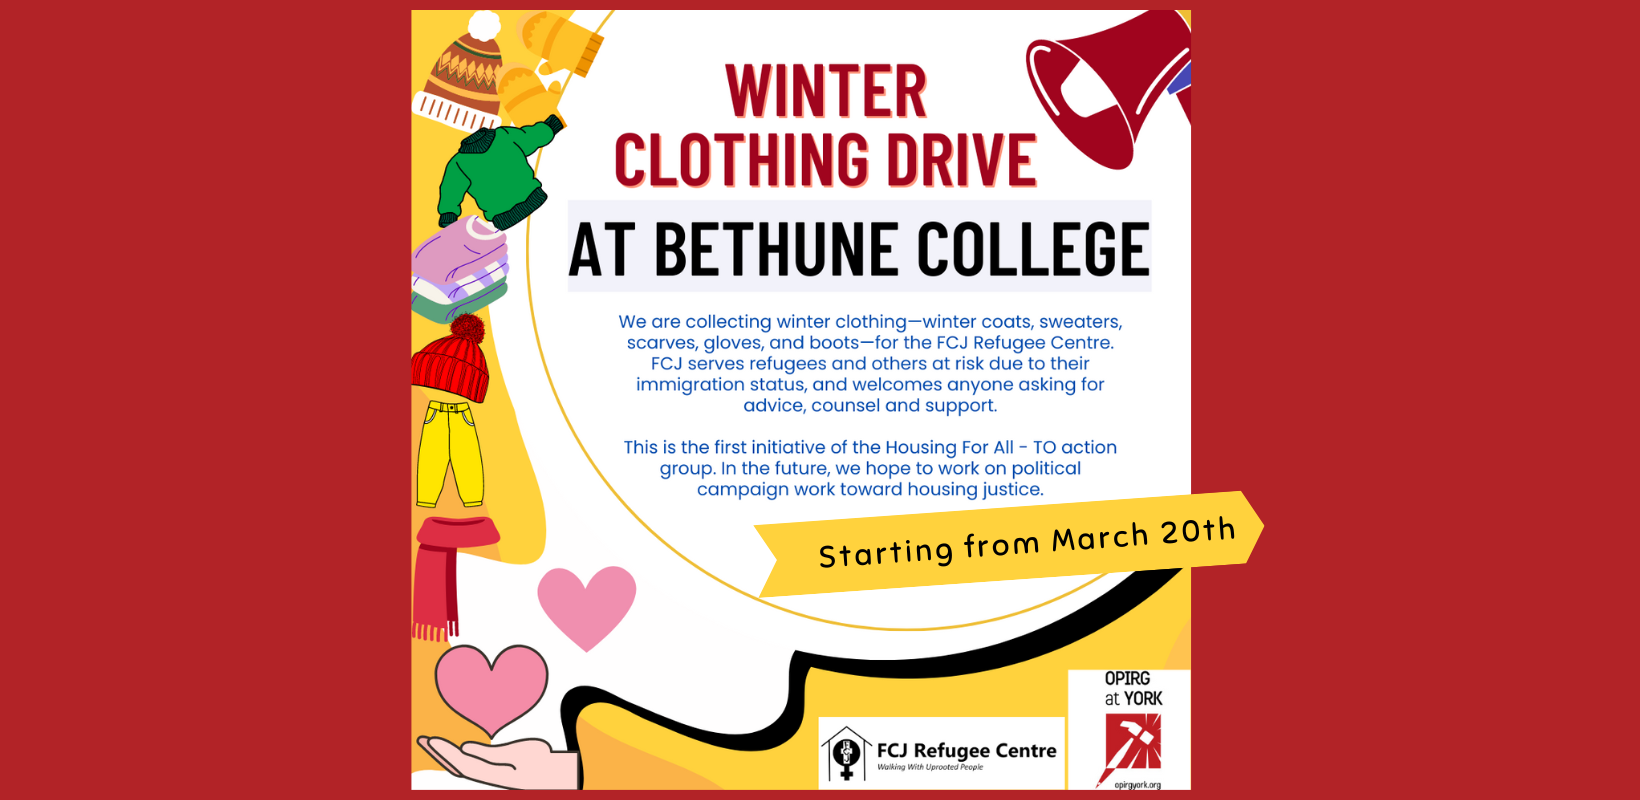 In the top right corner is a red megaphone. On the bottom left there is a hand with two pink hearts blossoming from it. On the left side of the poster there is a yellow background and several articles of winter clothing (a heat, mits, sweaters, snow pants). On a white background with red and black font: Winter Clothing Drive at Bethune College. In smaller font “We are collecting winter clothing—winter coats, sweaters, scarves, gloves, and boots—for the FCJ Refugee Centre. FCJ serves refugees and others at risk due to their immigration status, and welcomes anyone asking for advice, counsel and support.

This is the first initiative of the Housing For All - TO action group. In the future, we hope to work on political campaign work toward housing justice.” On a yellow arrow “Starting from March 20th.” At the bottom of the image are the logos for FCJ Refugee Centre and OPIRG at York.